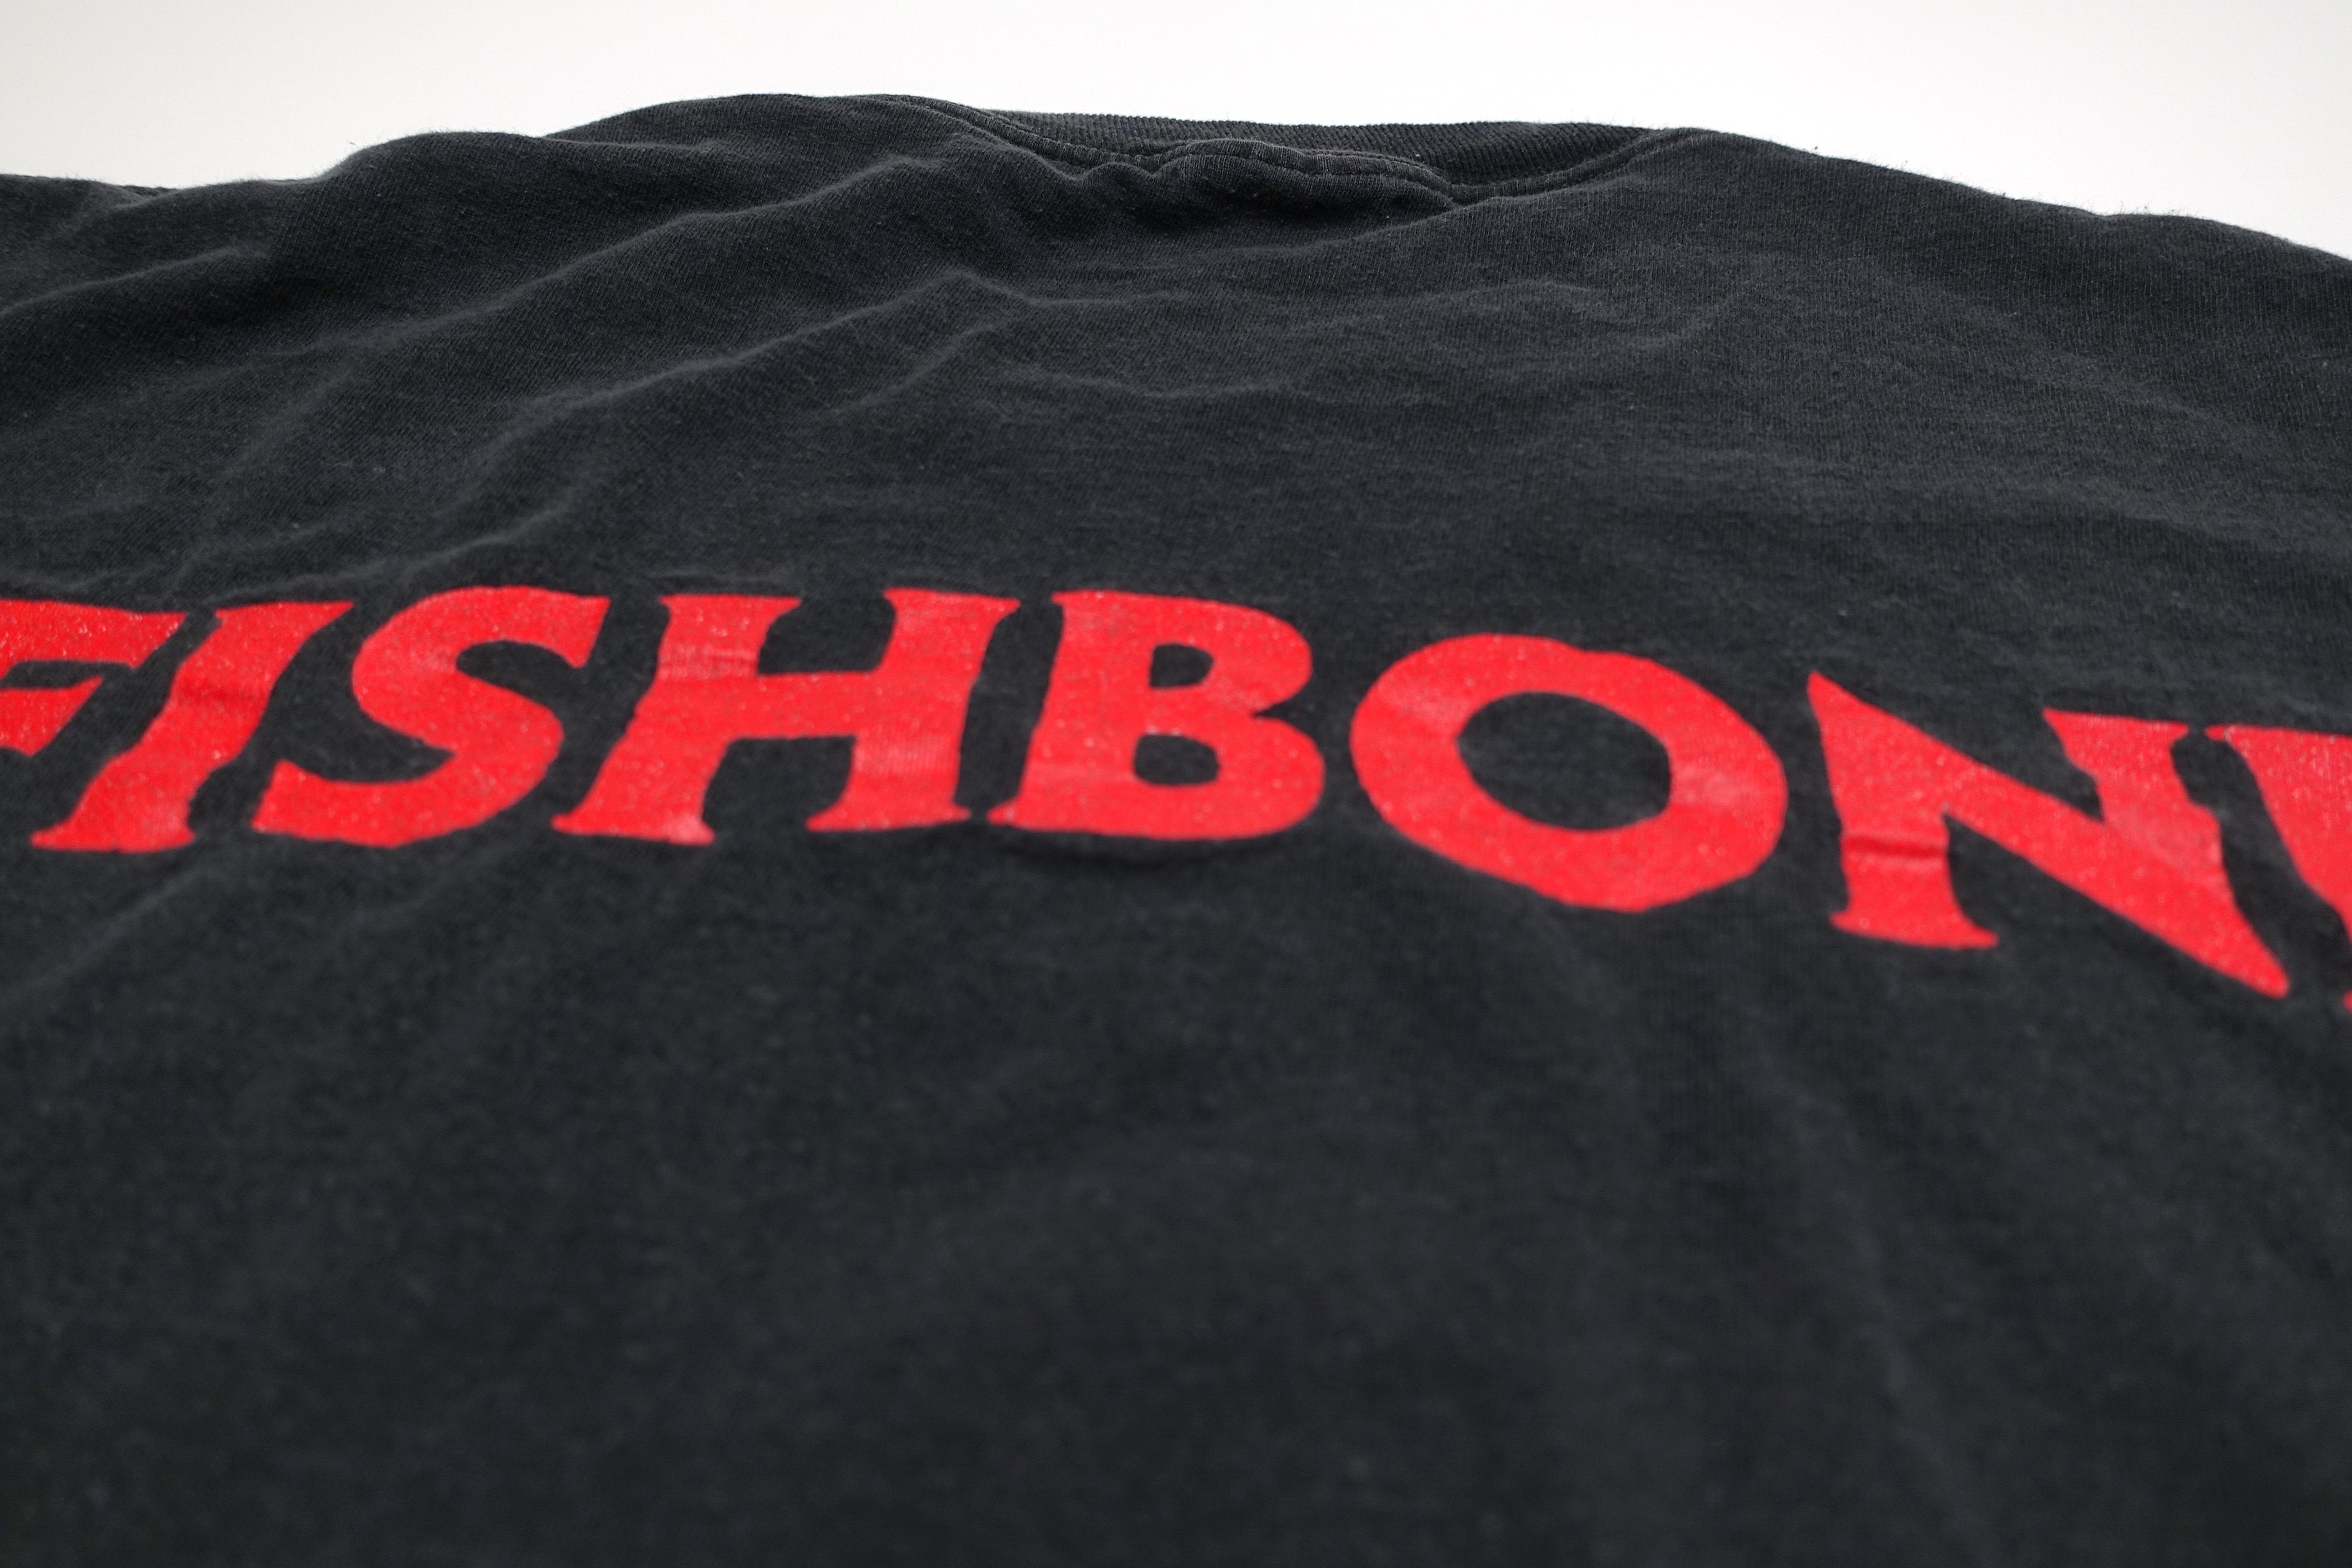 Fishbone - Truth And Soul Glow In The Dark 1990 Tour Shirt Size XL (Altered)